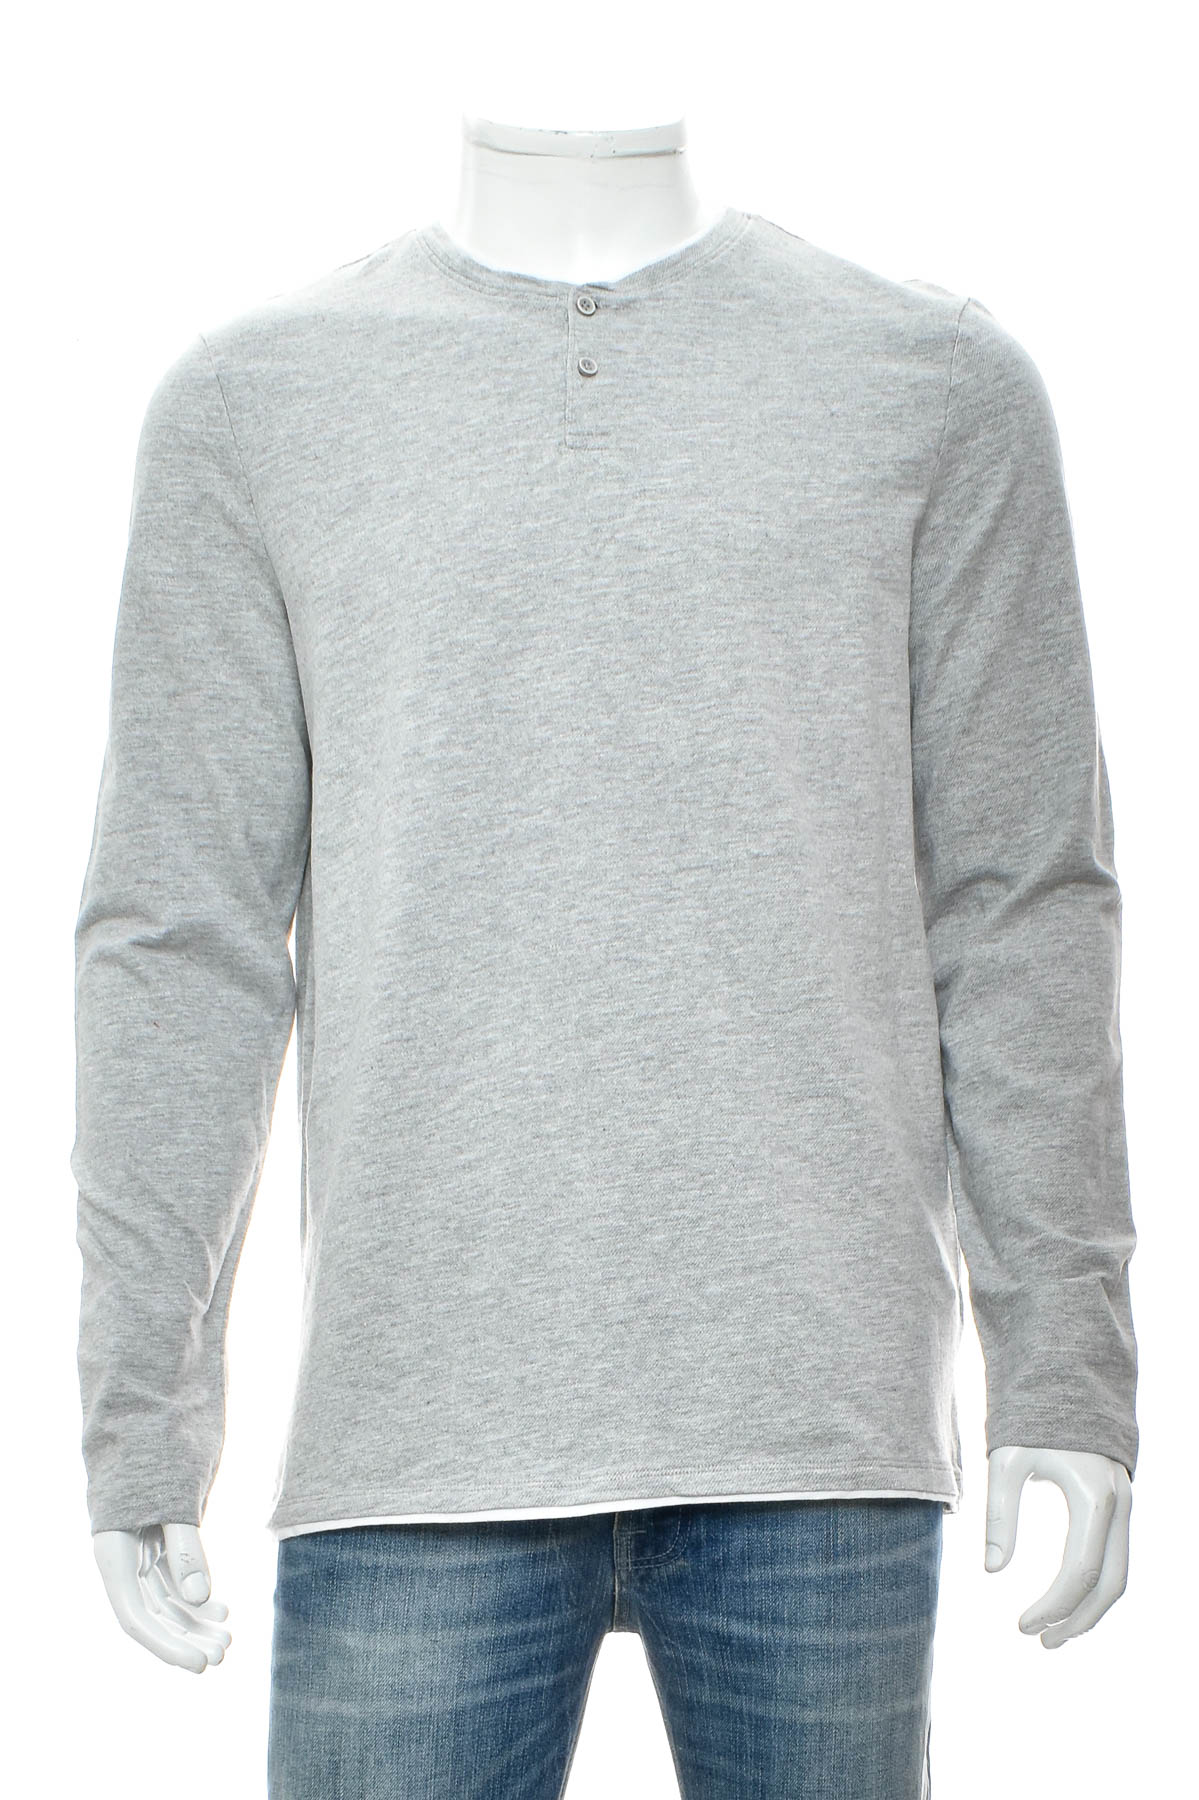 Men's sweater - RESERVED - 0